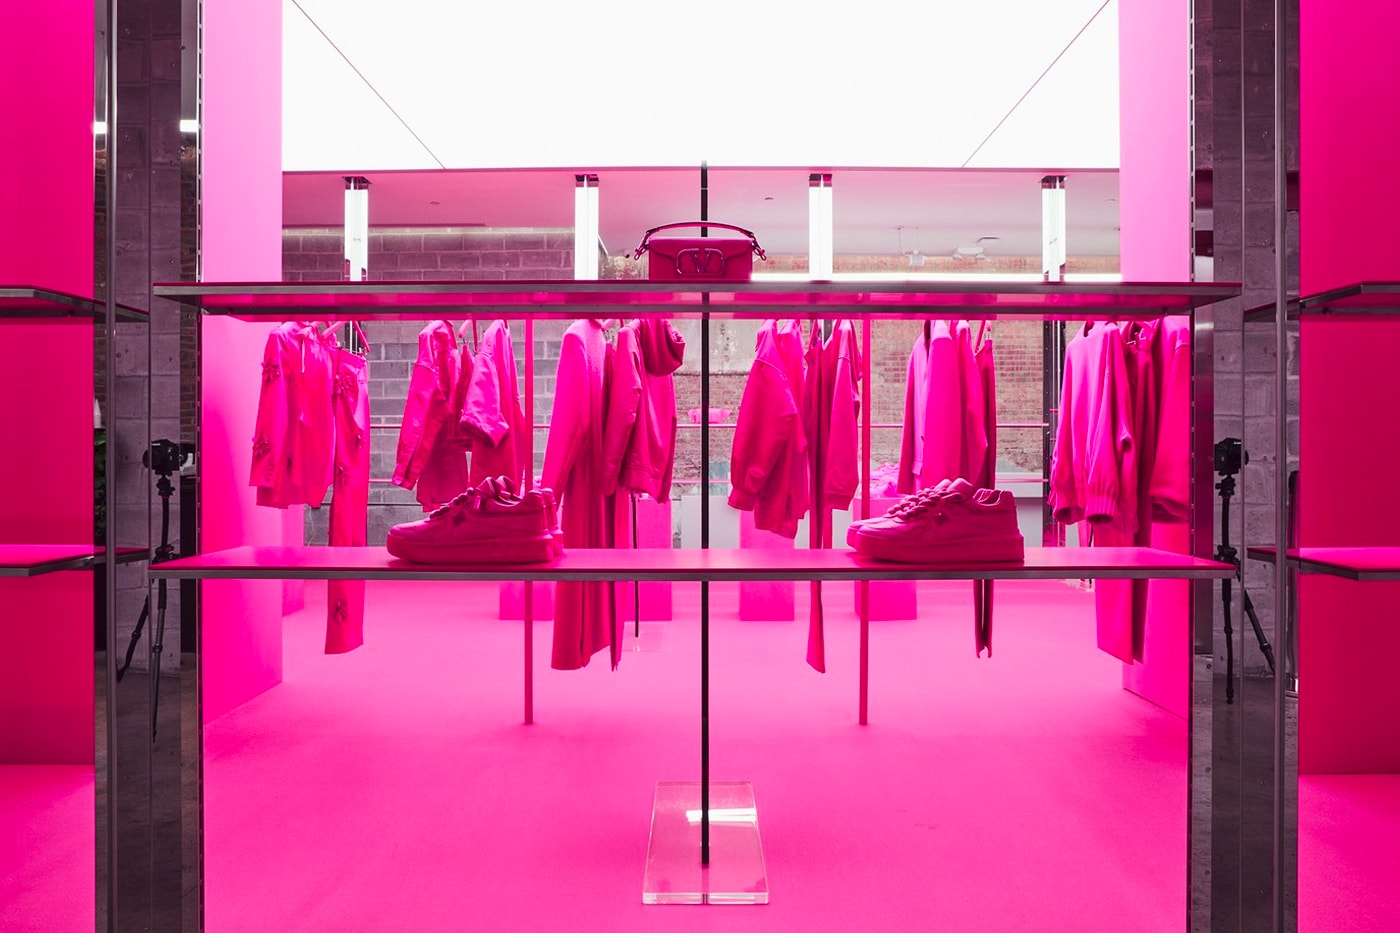 Maison Valentino Installation at HBX pink pink pp collection Pierpaolo Piccioli clothing sneakers apparel retail new york nyc 